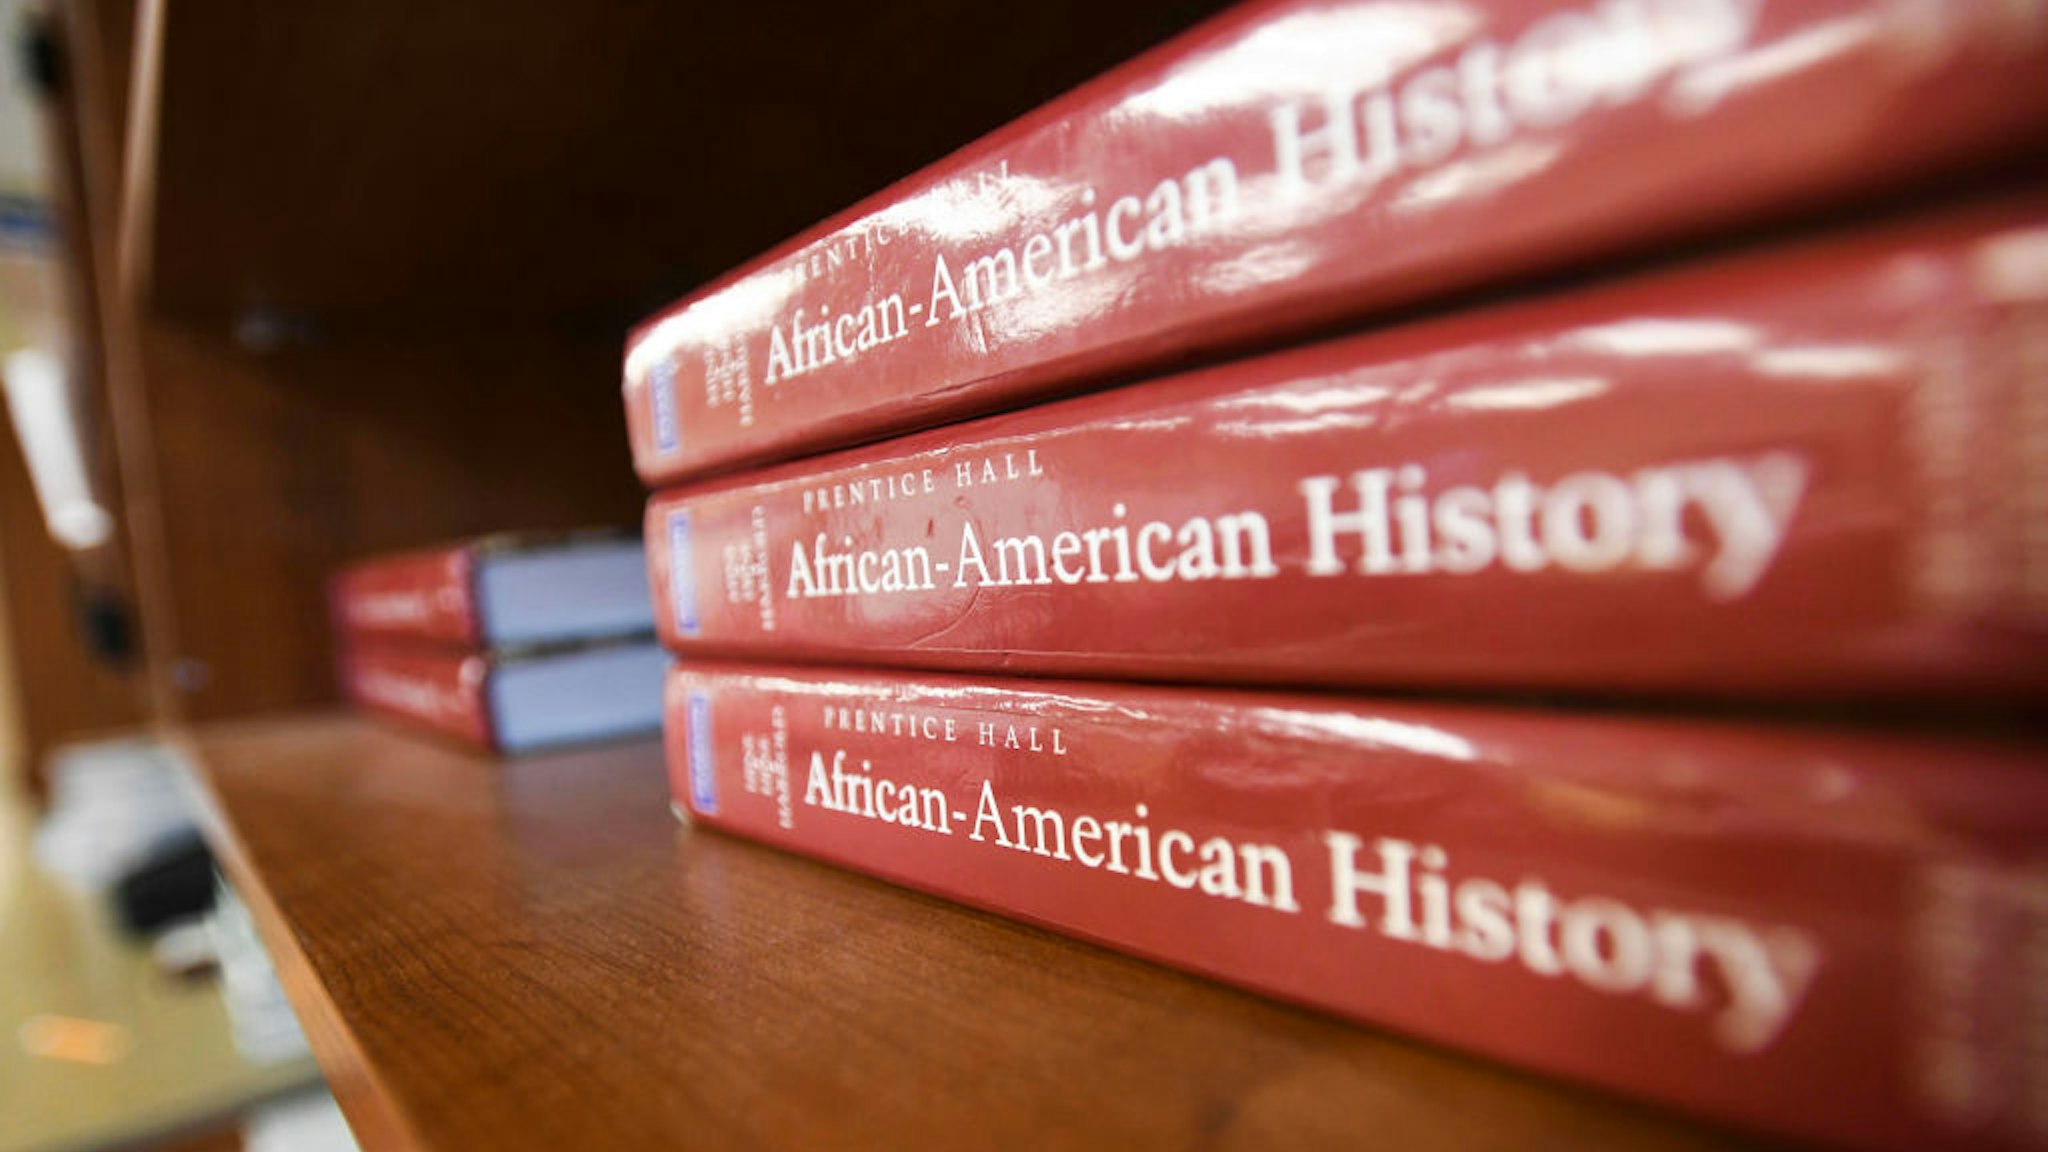 BIRMINGHAM, AL - APRIL 8: An Africa-American textbook sits on the shelf in an advanced placement social studies class at Huffman High School in Birmingham, Ala., on April 8, 2019.